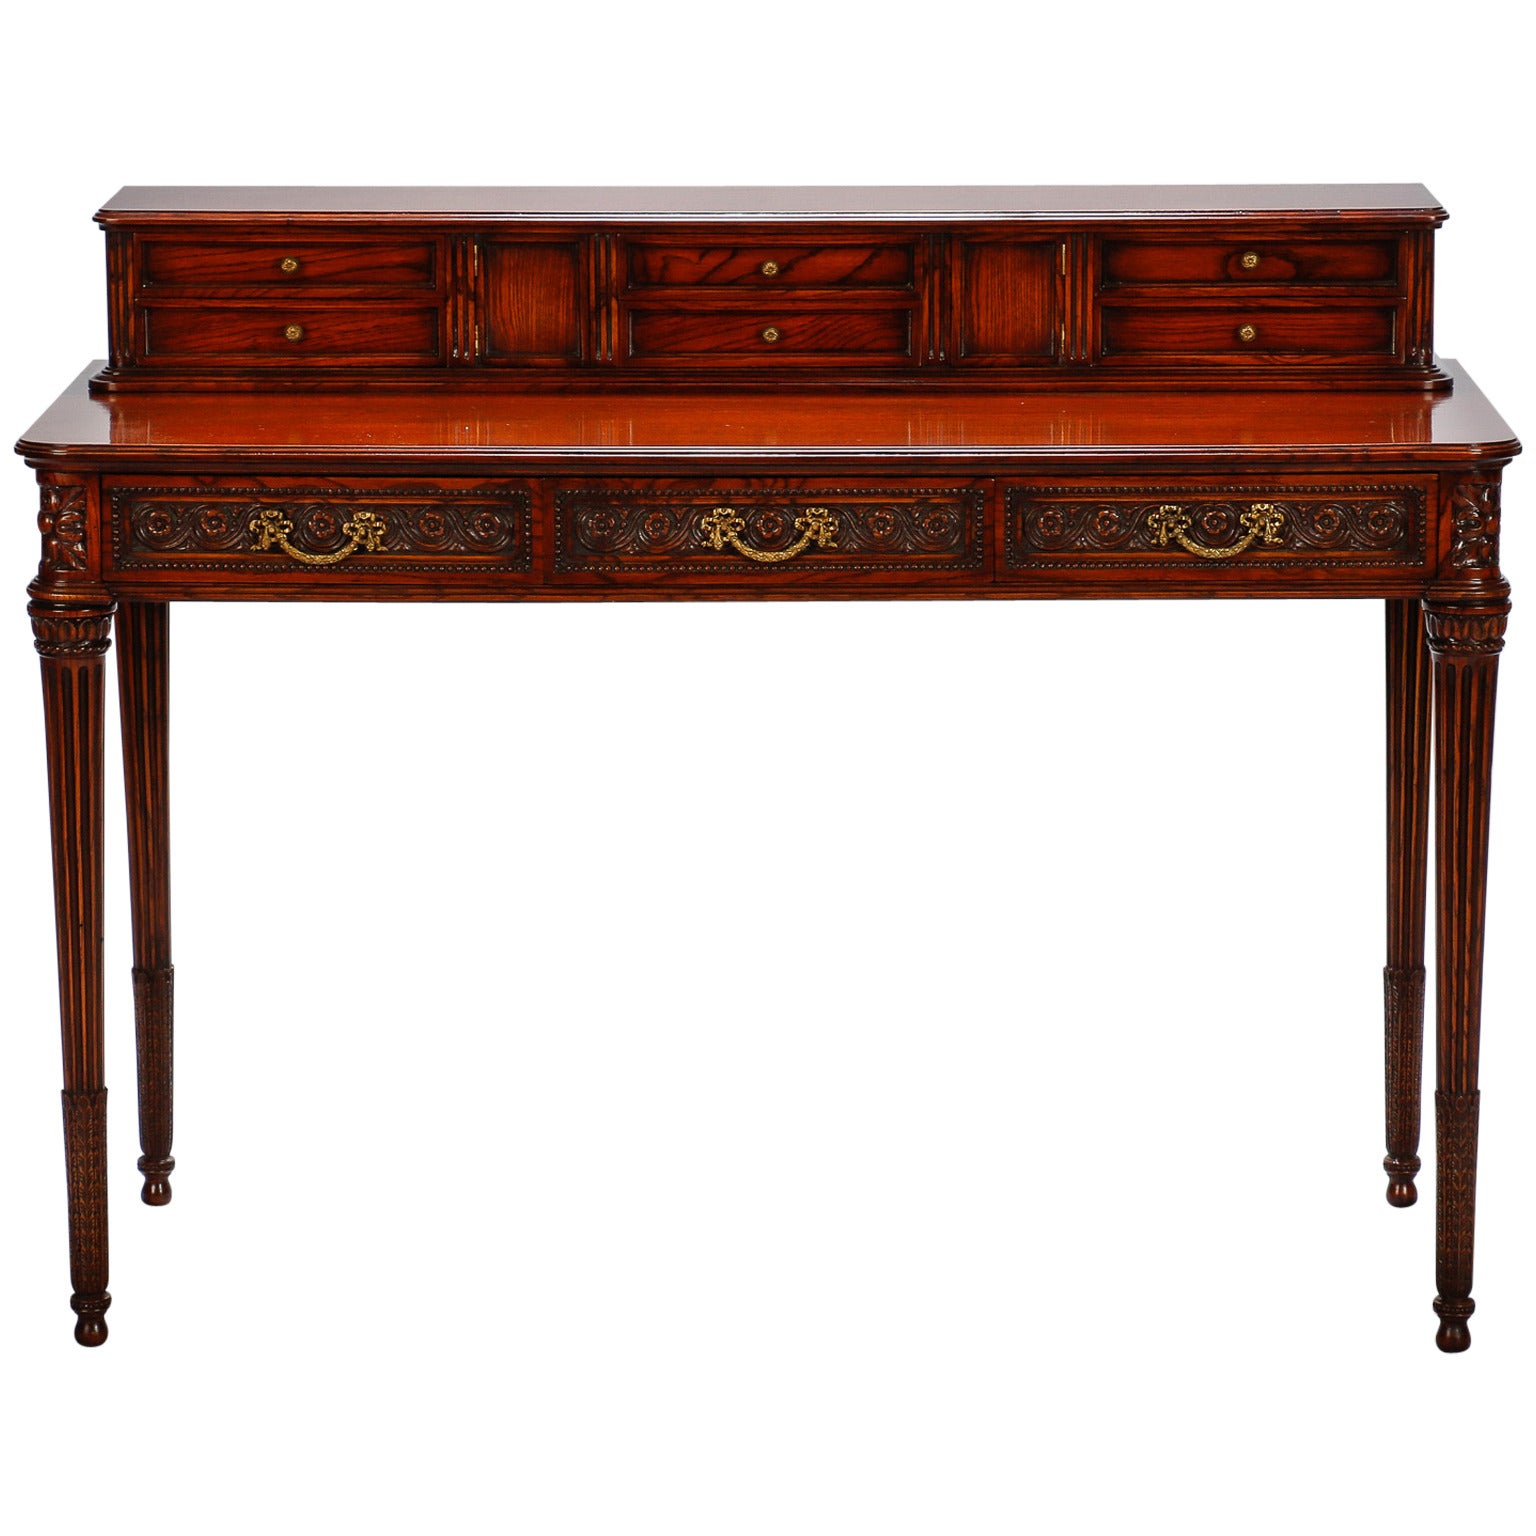 French Writing Desk with Carved Details and Back Plinth